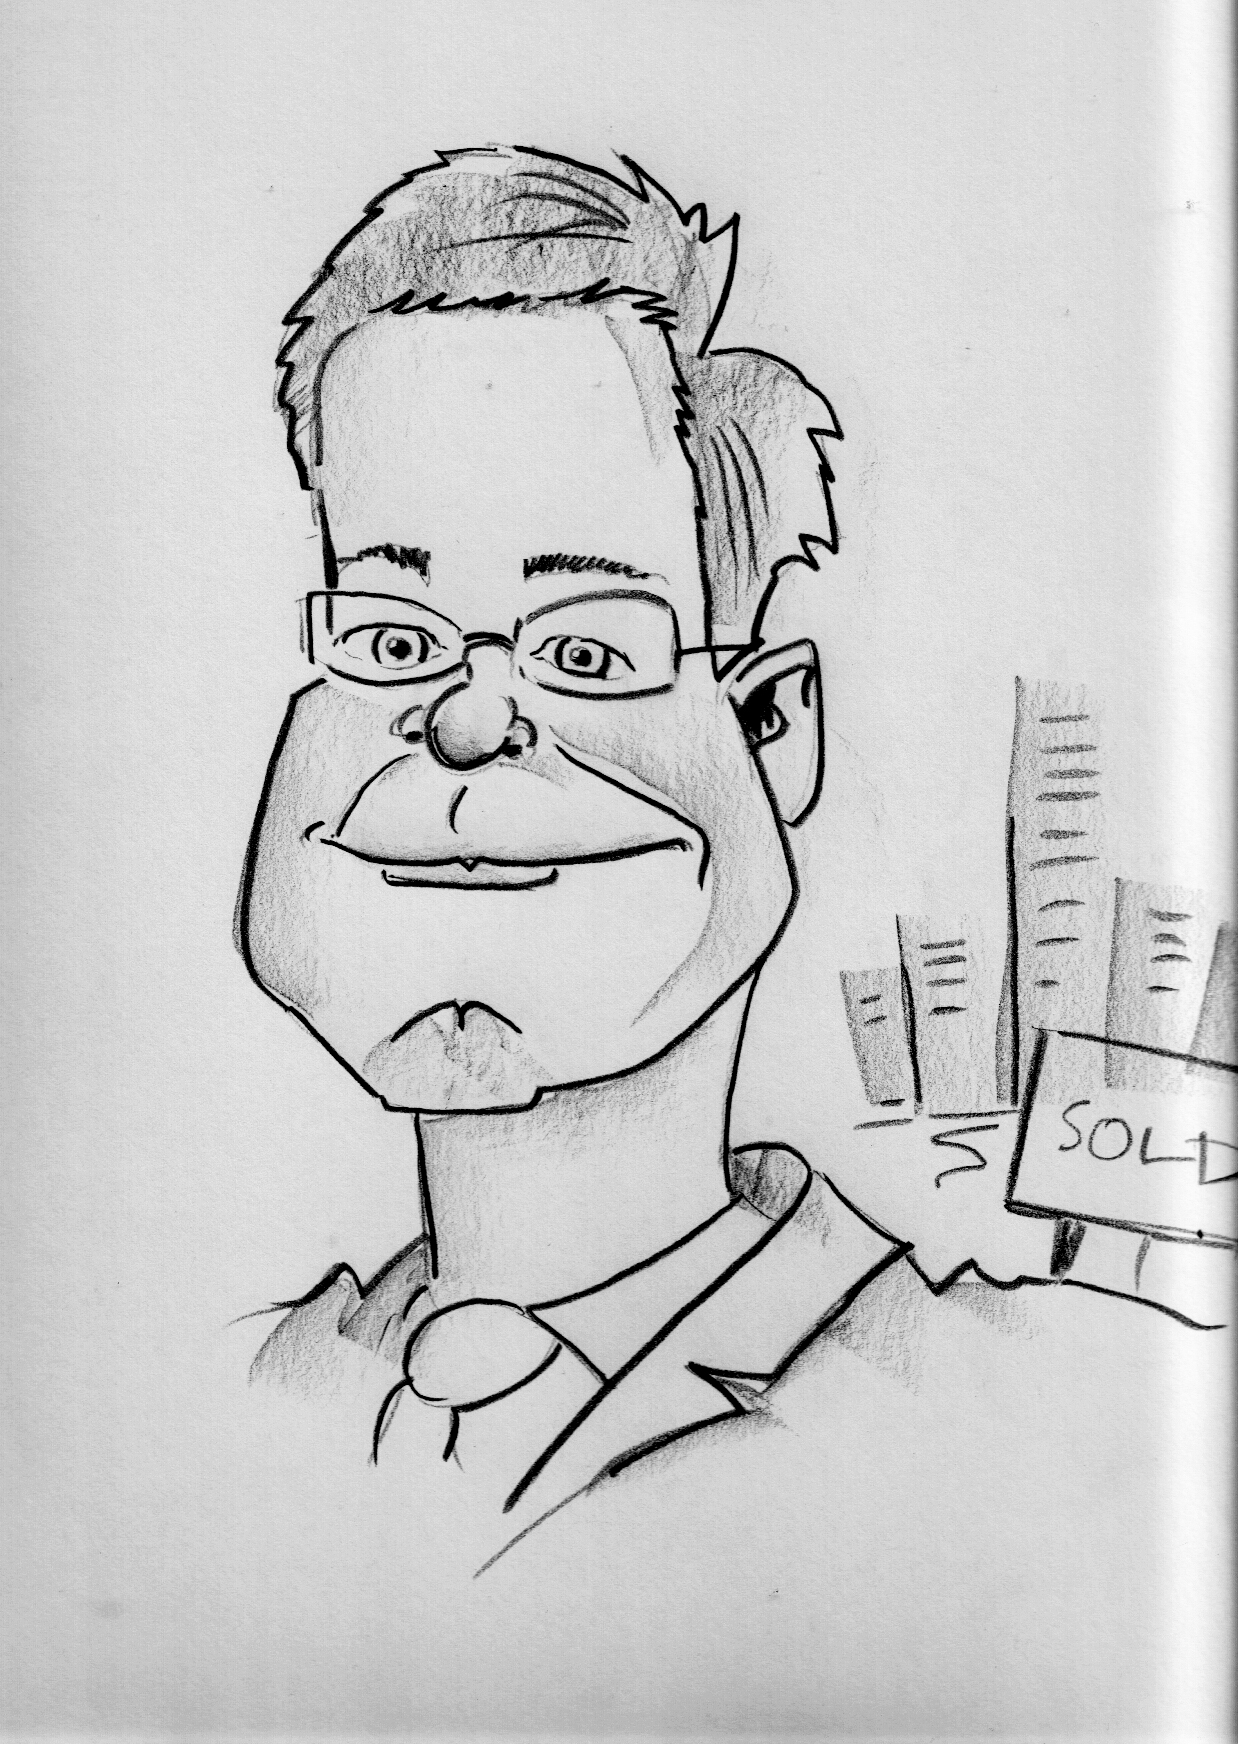 caricature of a company guy in Buildings